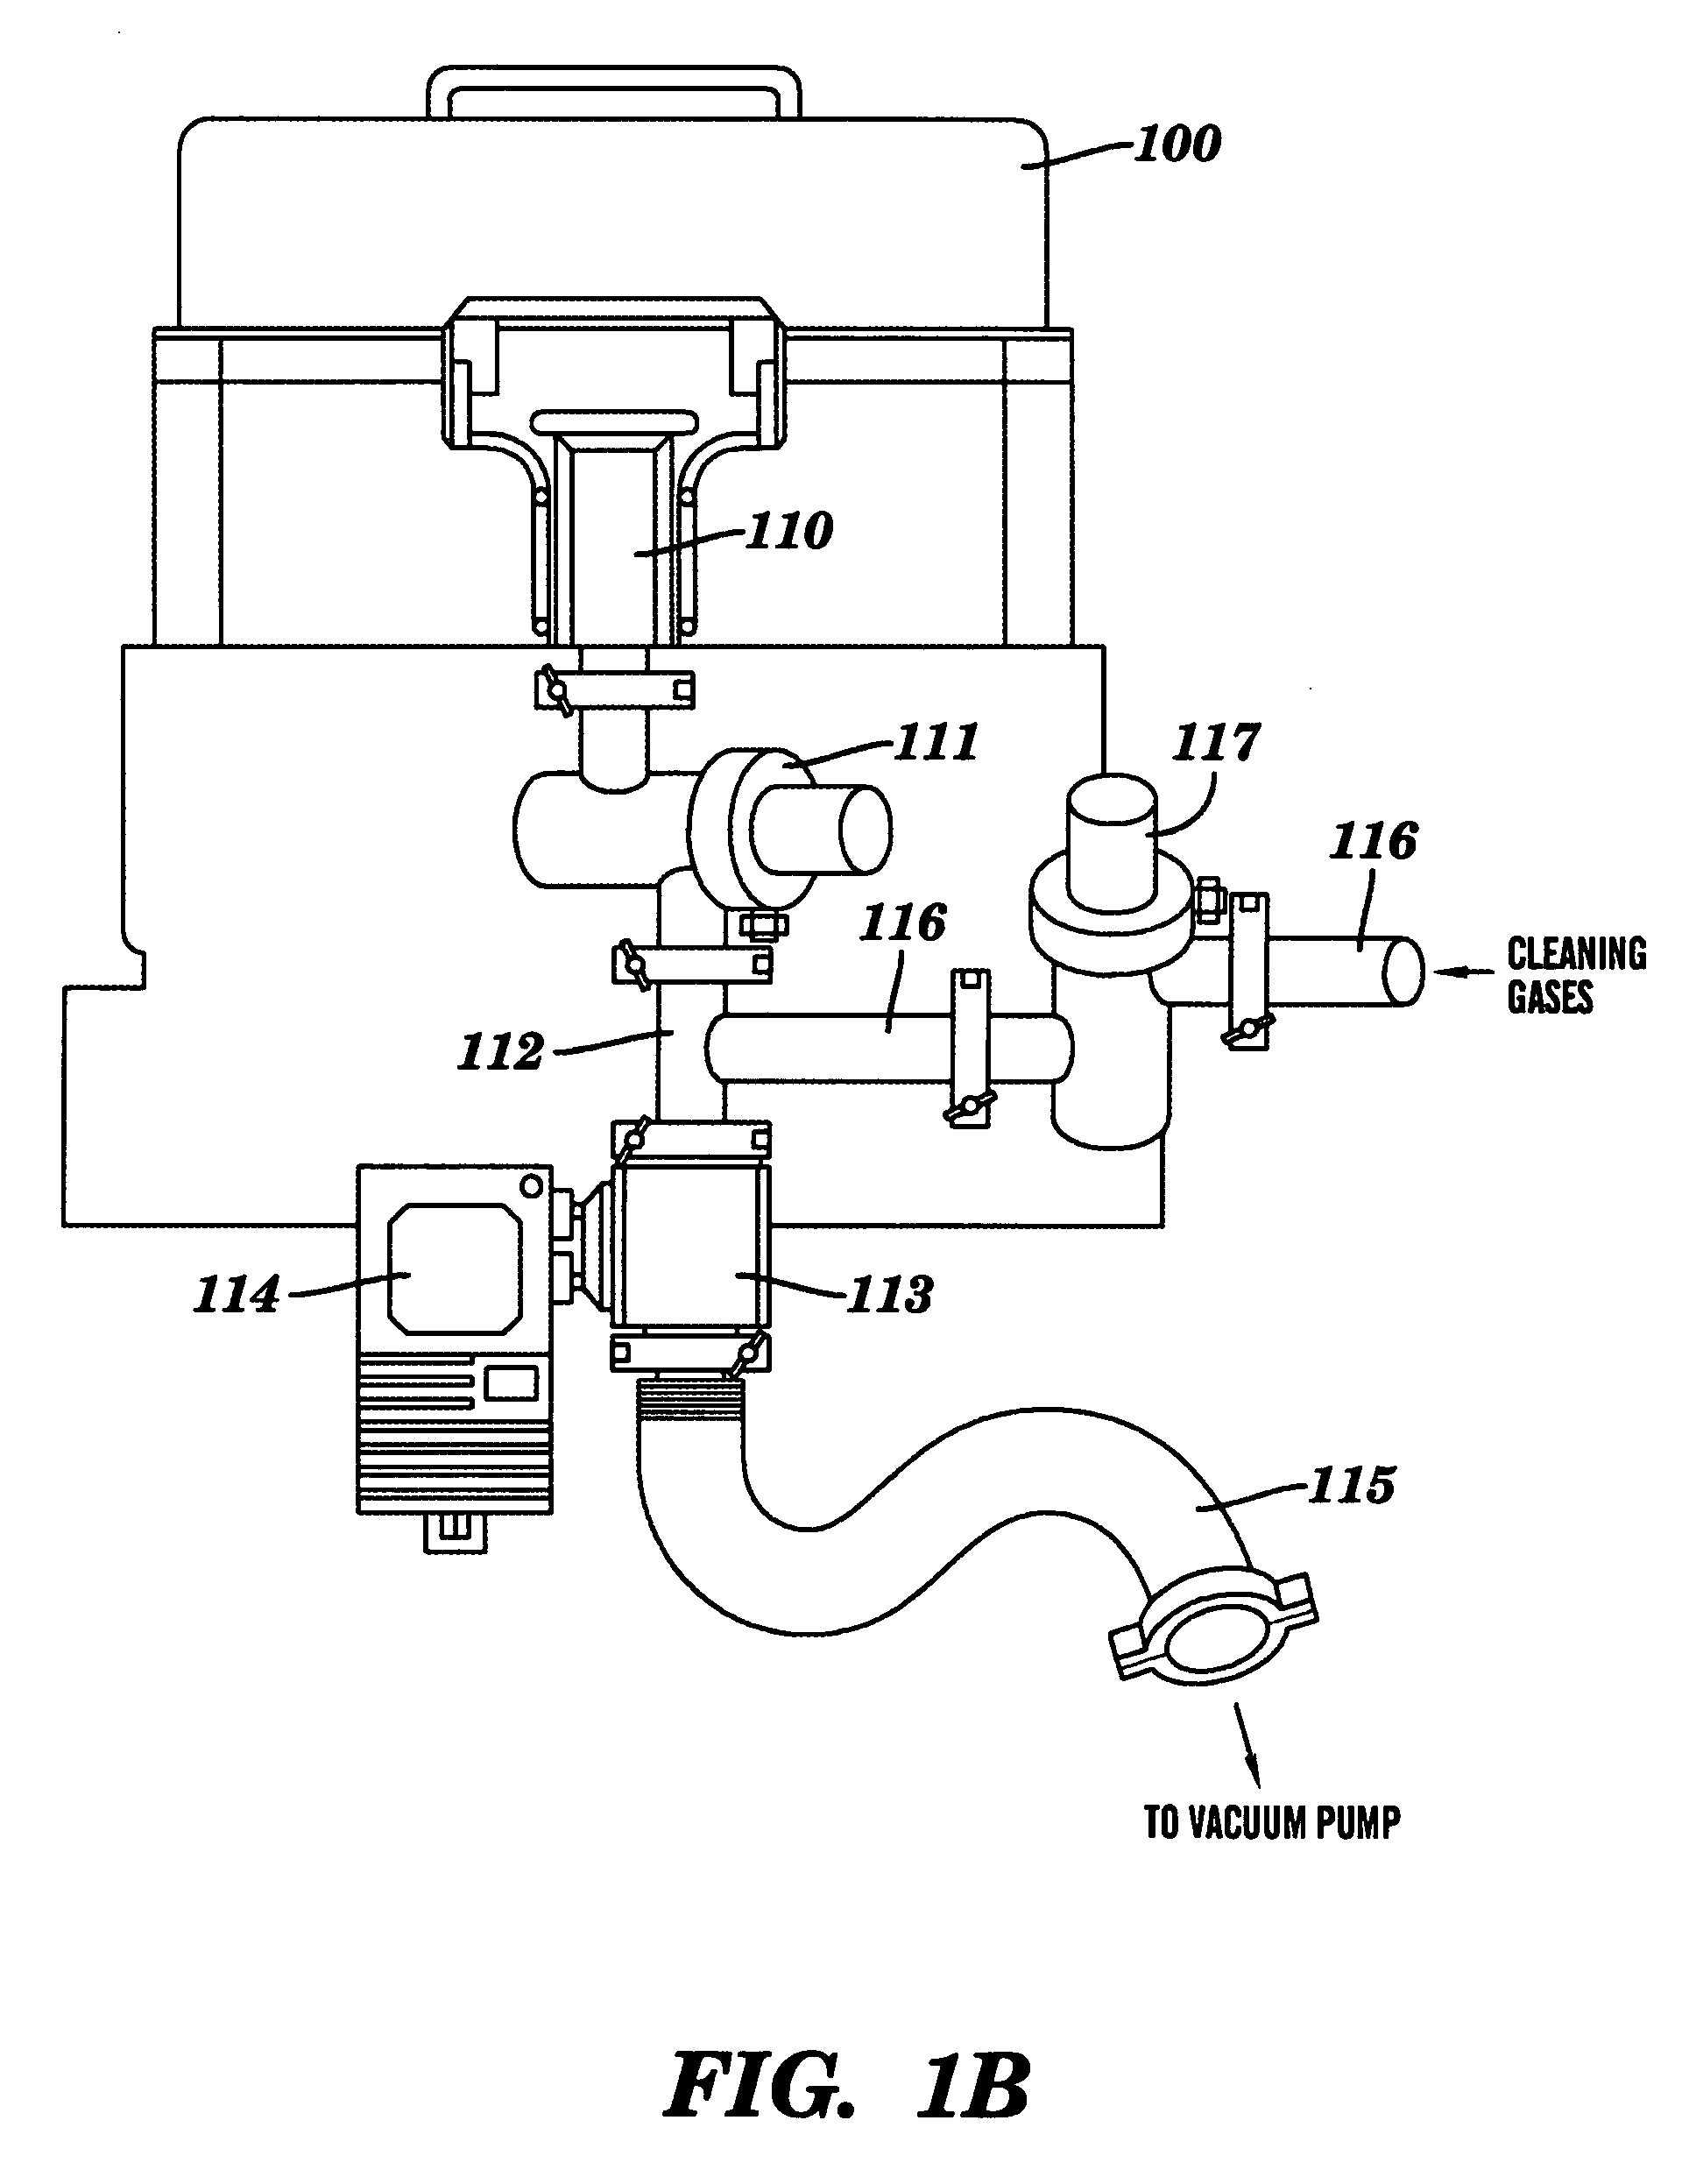 Apparatus and method for in-situ cleaning of a throttle valve in a CVD system